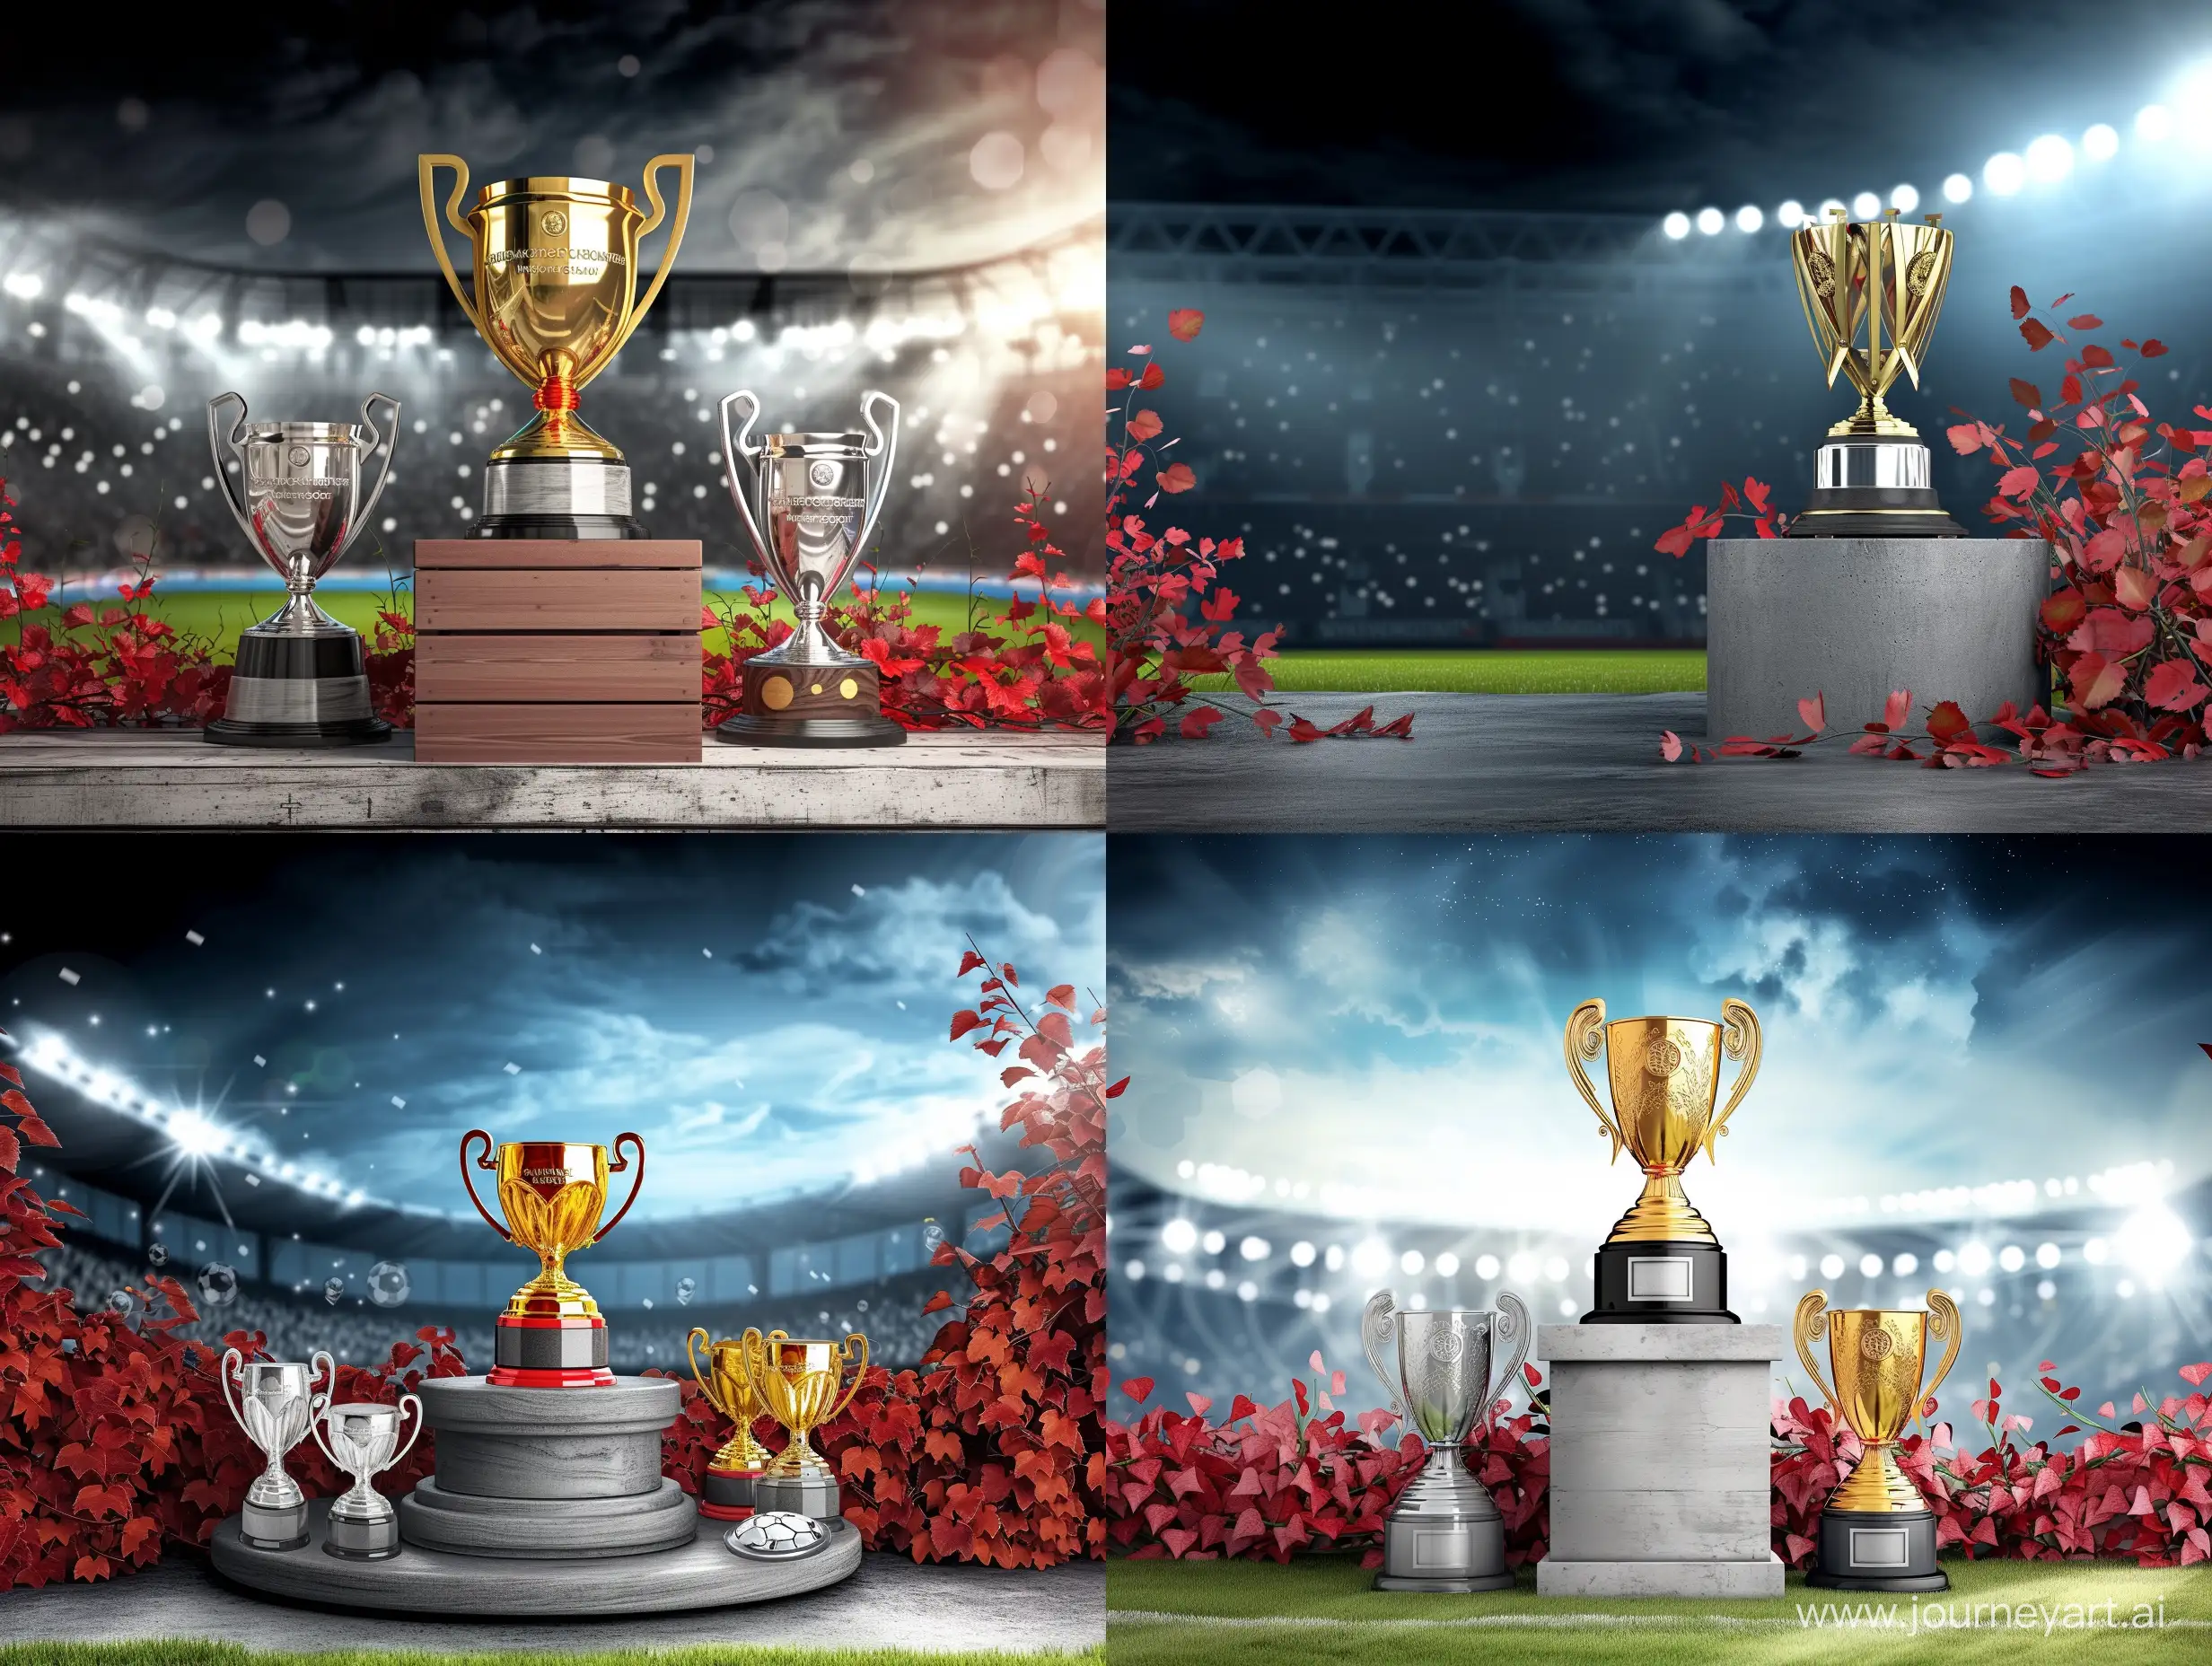 Soccer-Stadium-Podium-with-Gold-and-Silver-Trophies-Under-Dramatic-Night-Lights